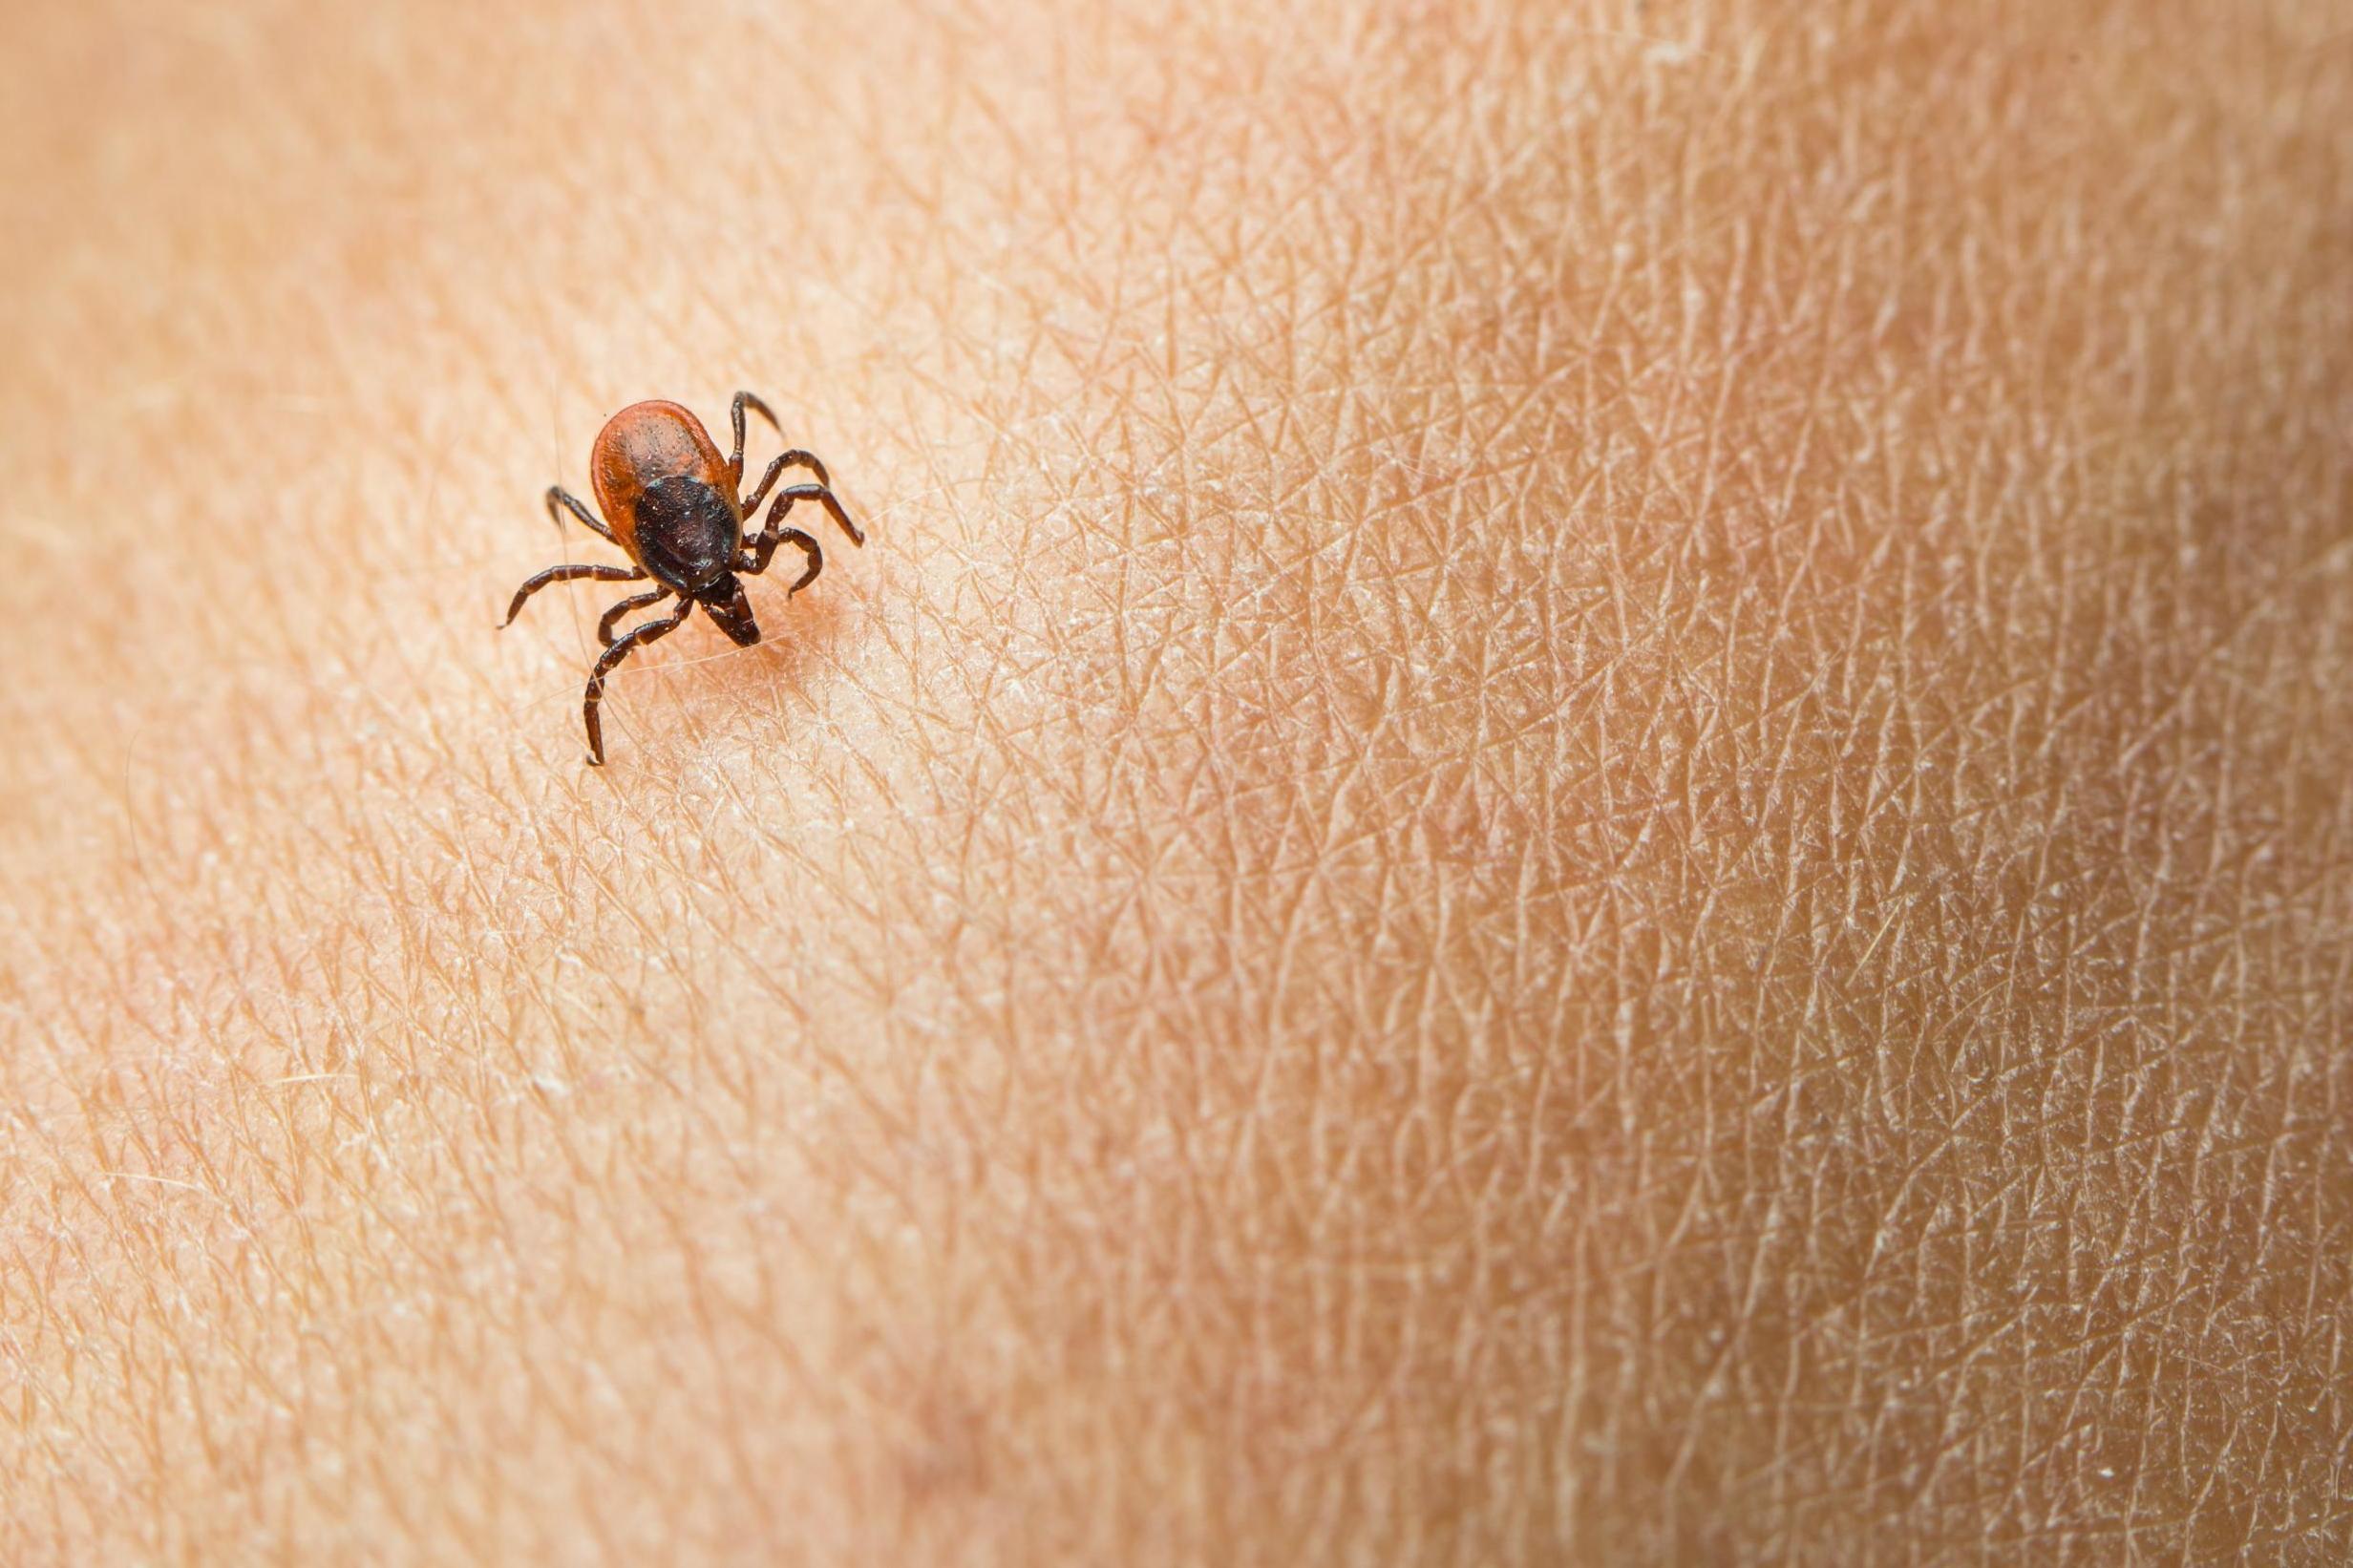 A man learned his eye discomfort was caused by a tick